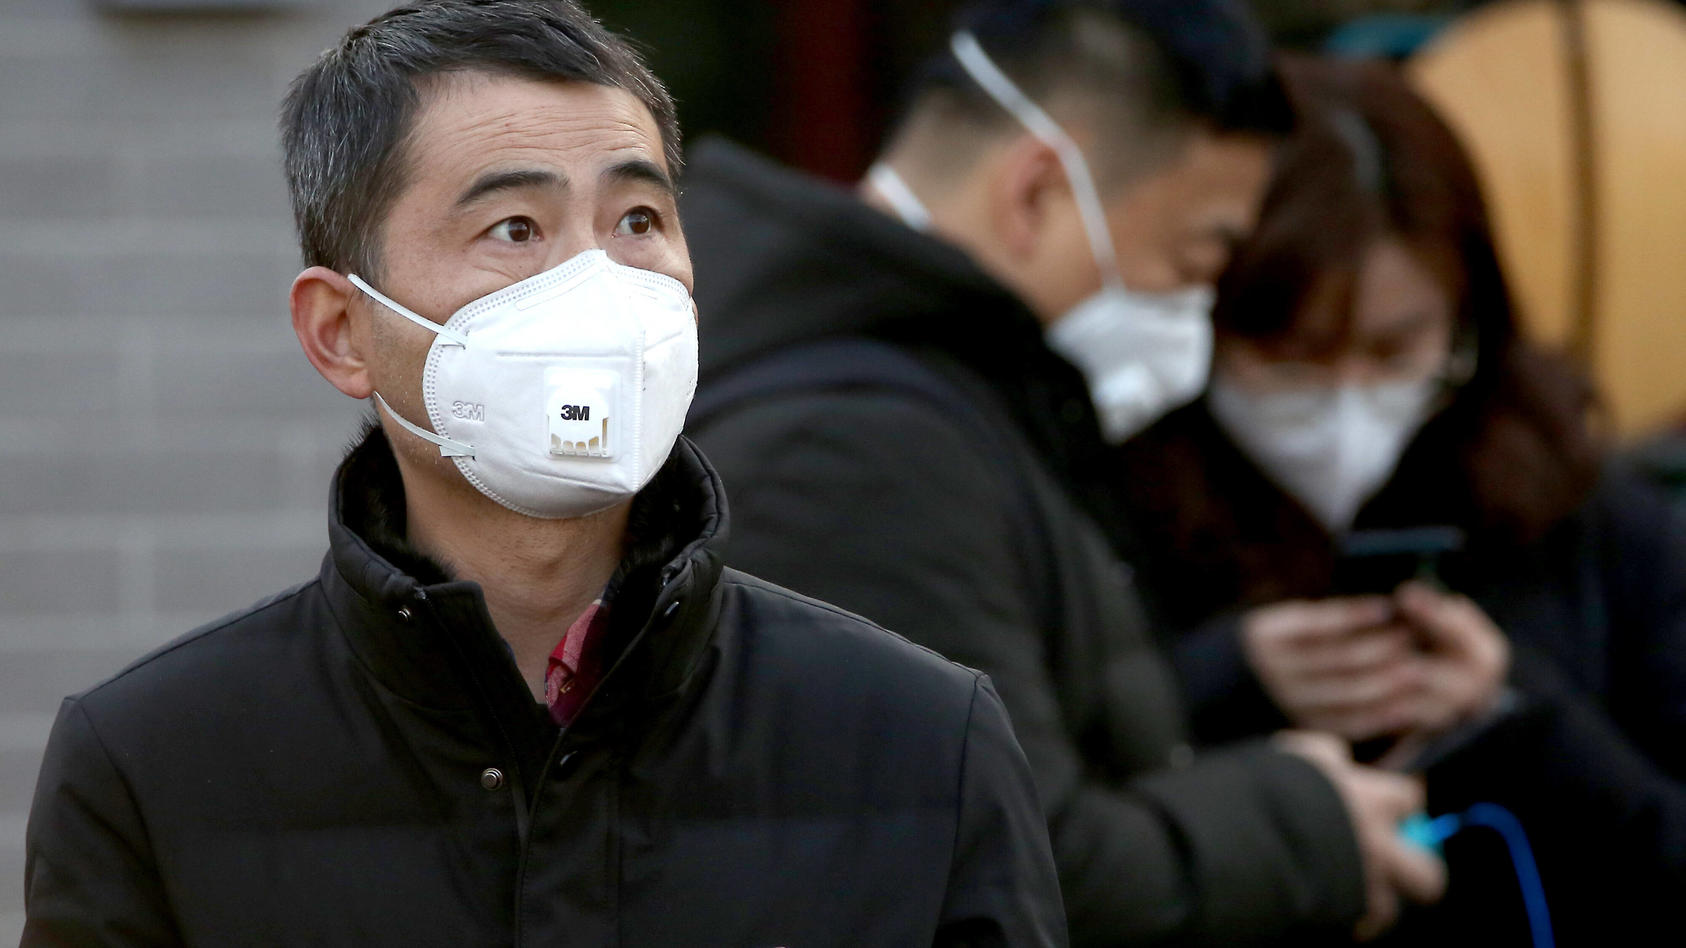  Chinese wear protective respiratory masks in Beijing on Thursday, January 23, 2020. China has locked down some 20 million people a the epicenter of a deadly virus outbreak, Wuhan, banning trains and planes from leaving in an unprecedented move aimed